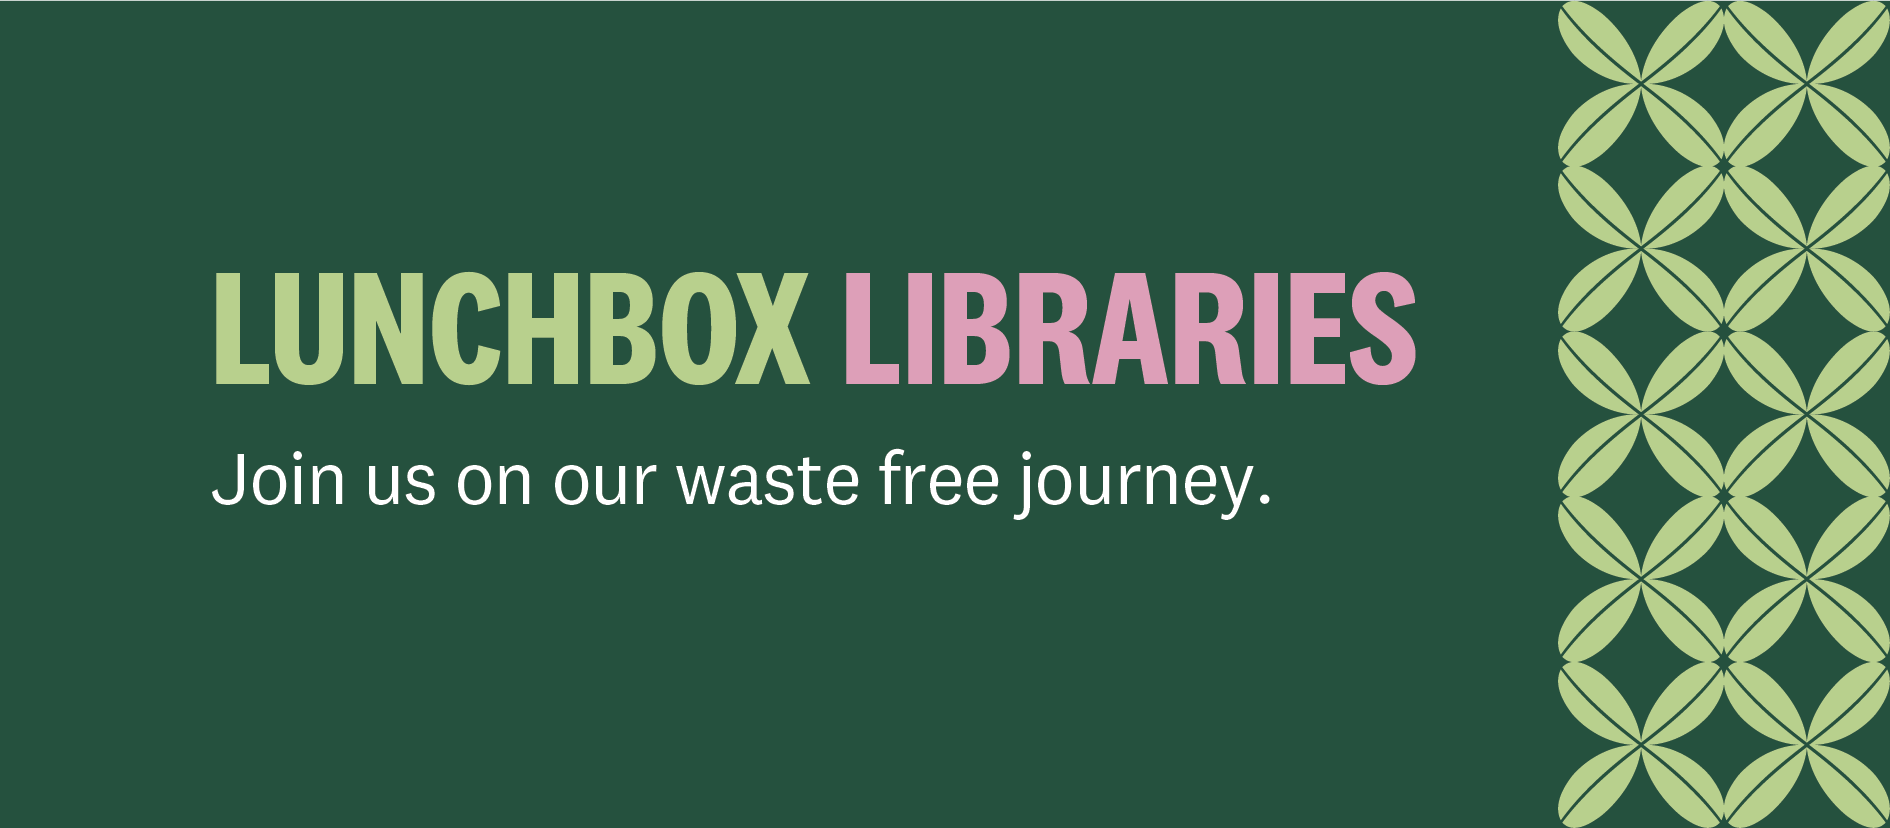 Lunchbox Libraries